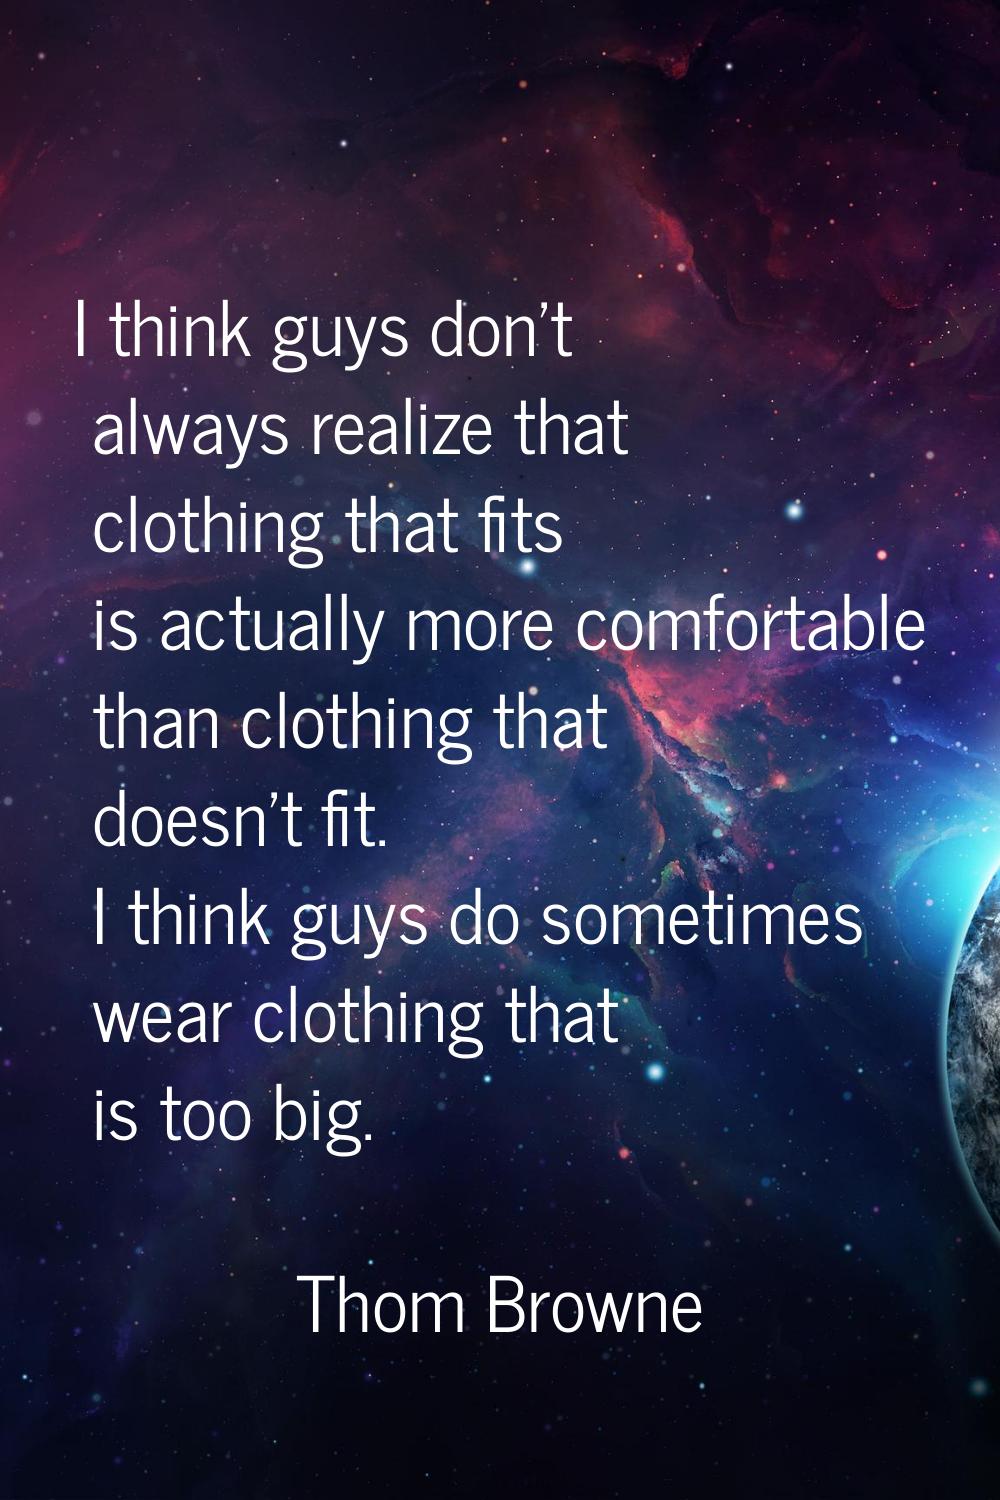 I think guys don't always realize that clothing that fits is actually more comfortable than clothin